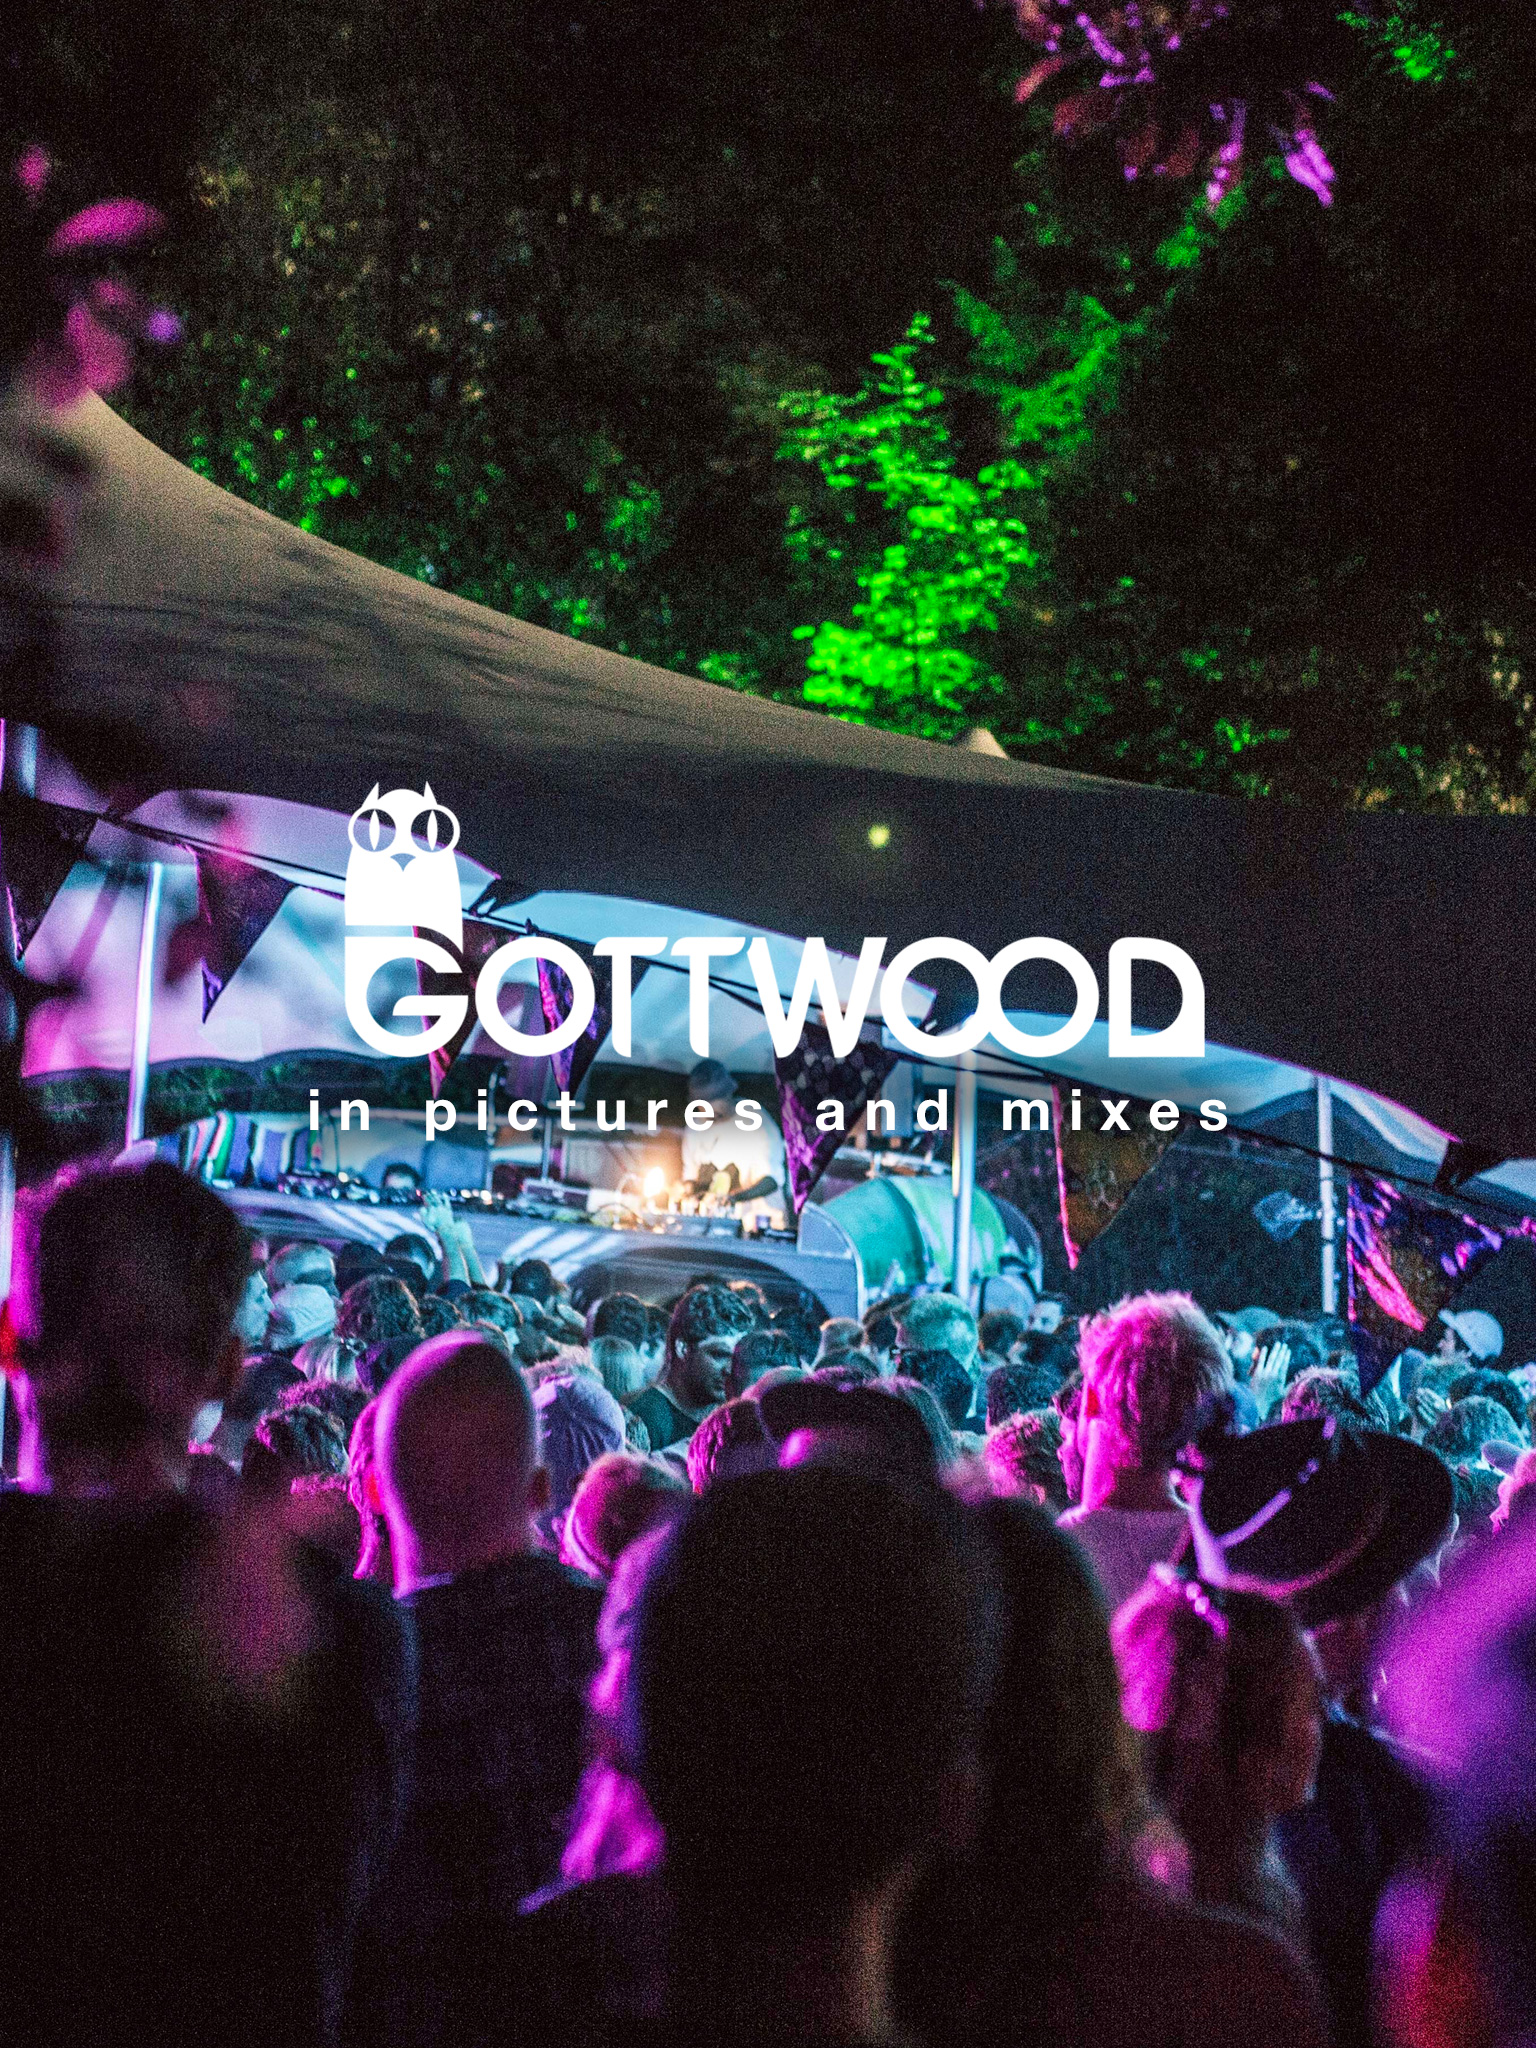 Gottwood Festival in pictures and mixes